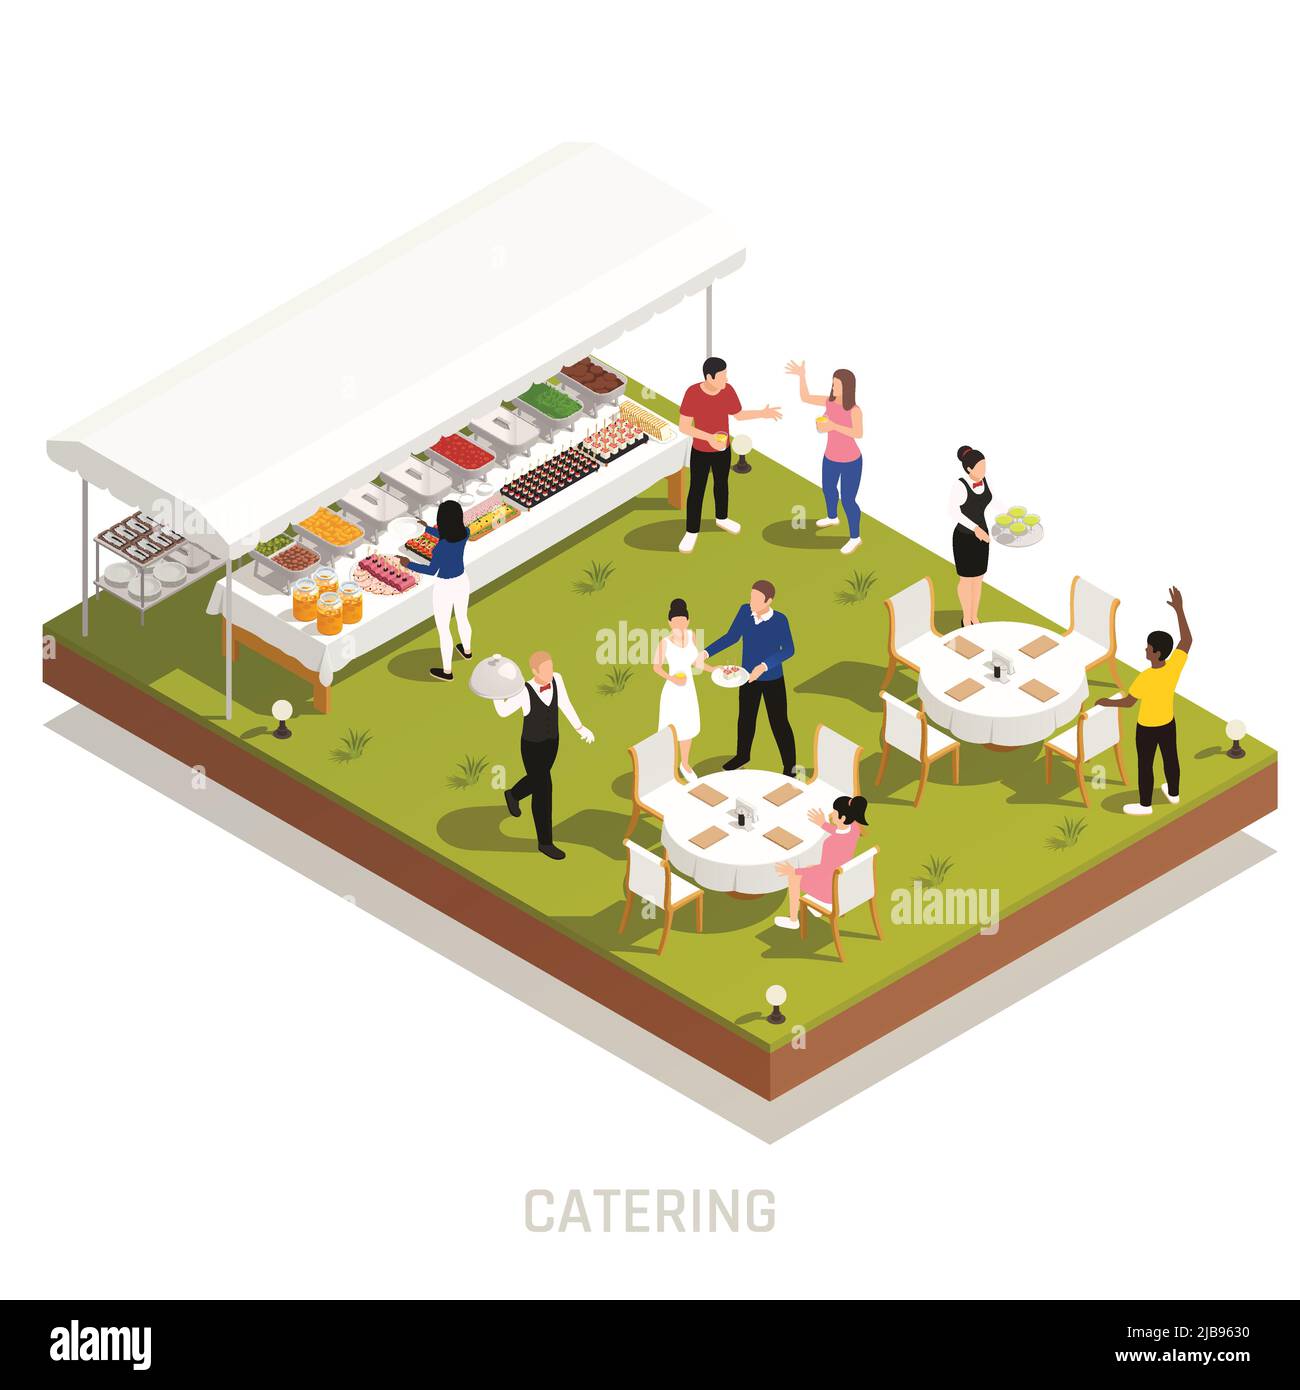 Backyard wedding reception catering with outdoor buffet and waiters serving tables on grassy area isometric vector illustration Stock Vector